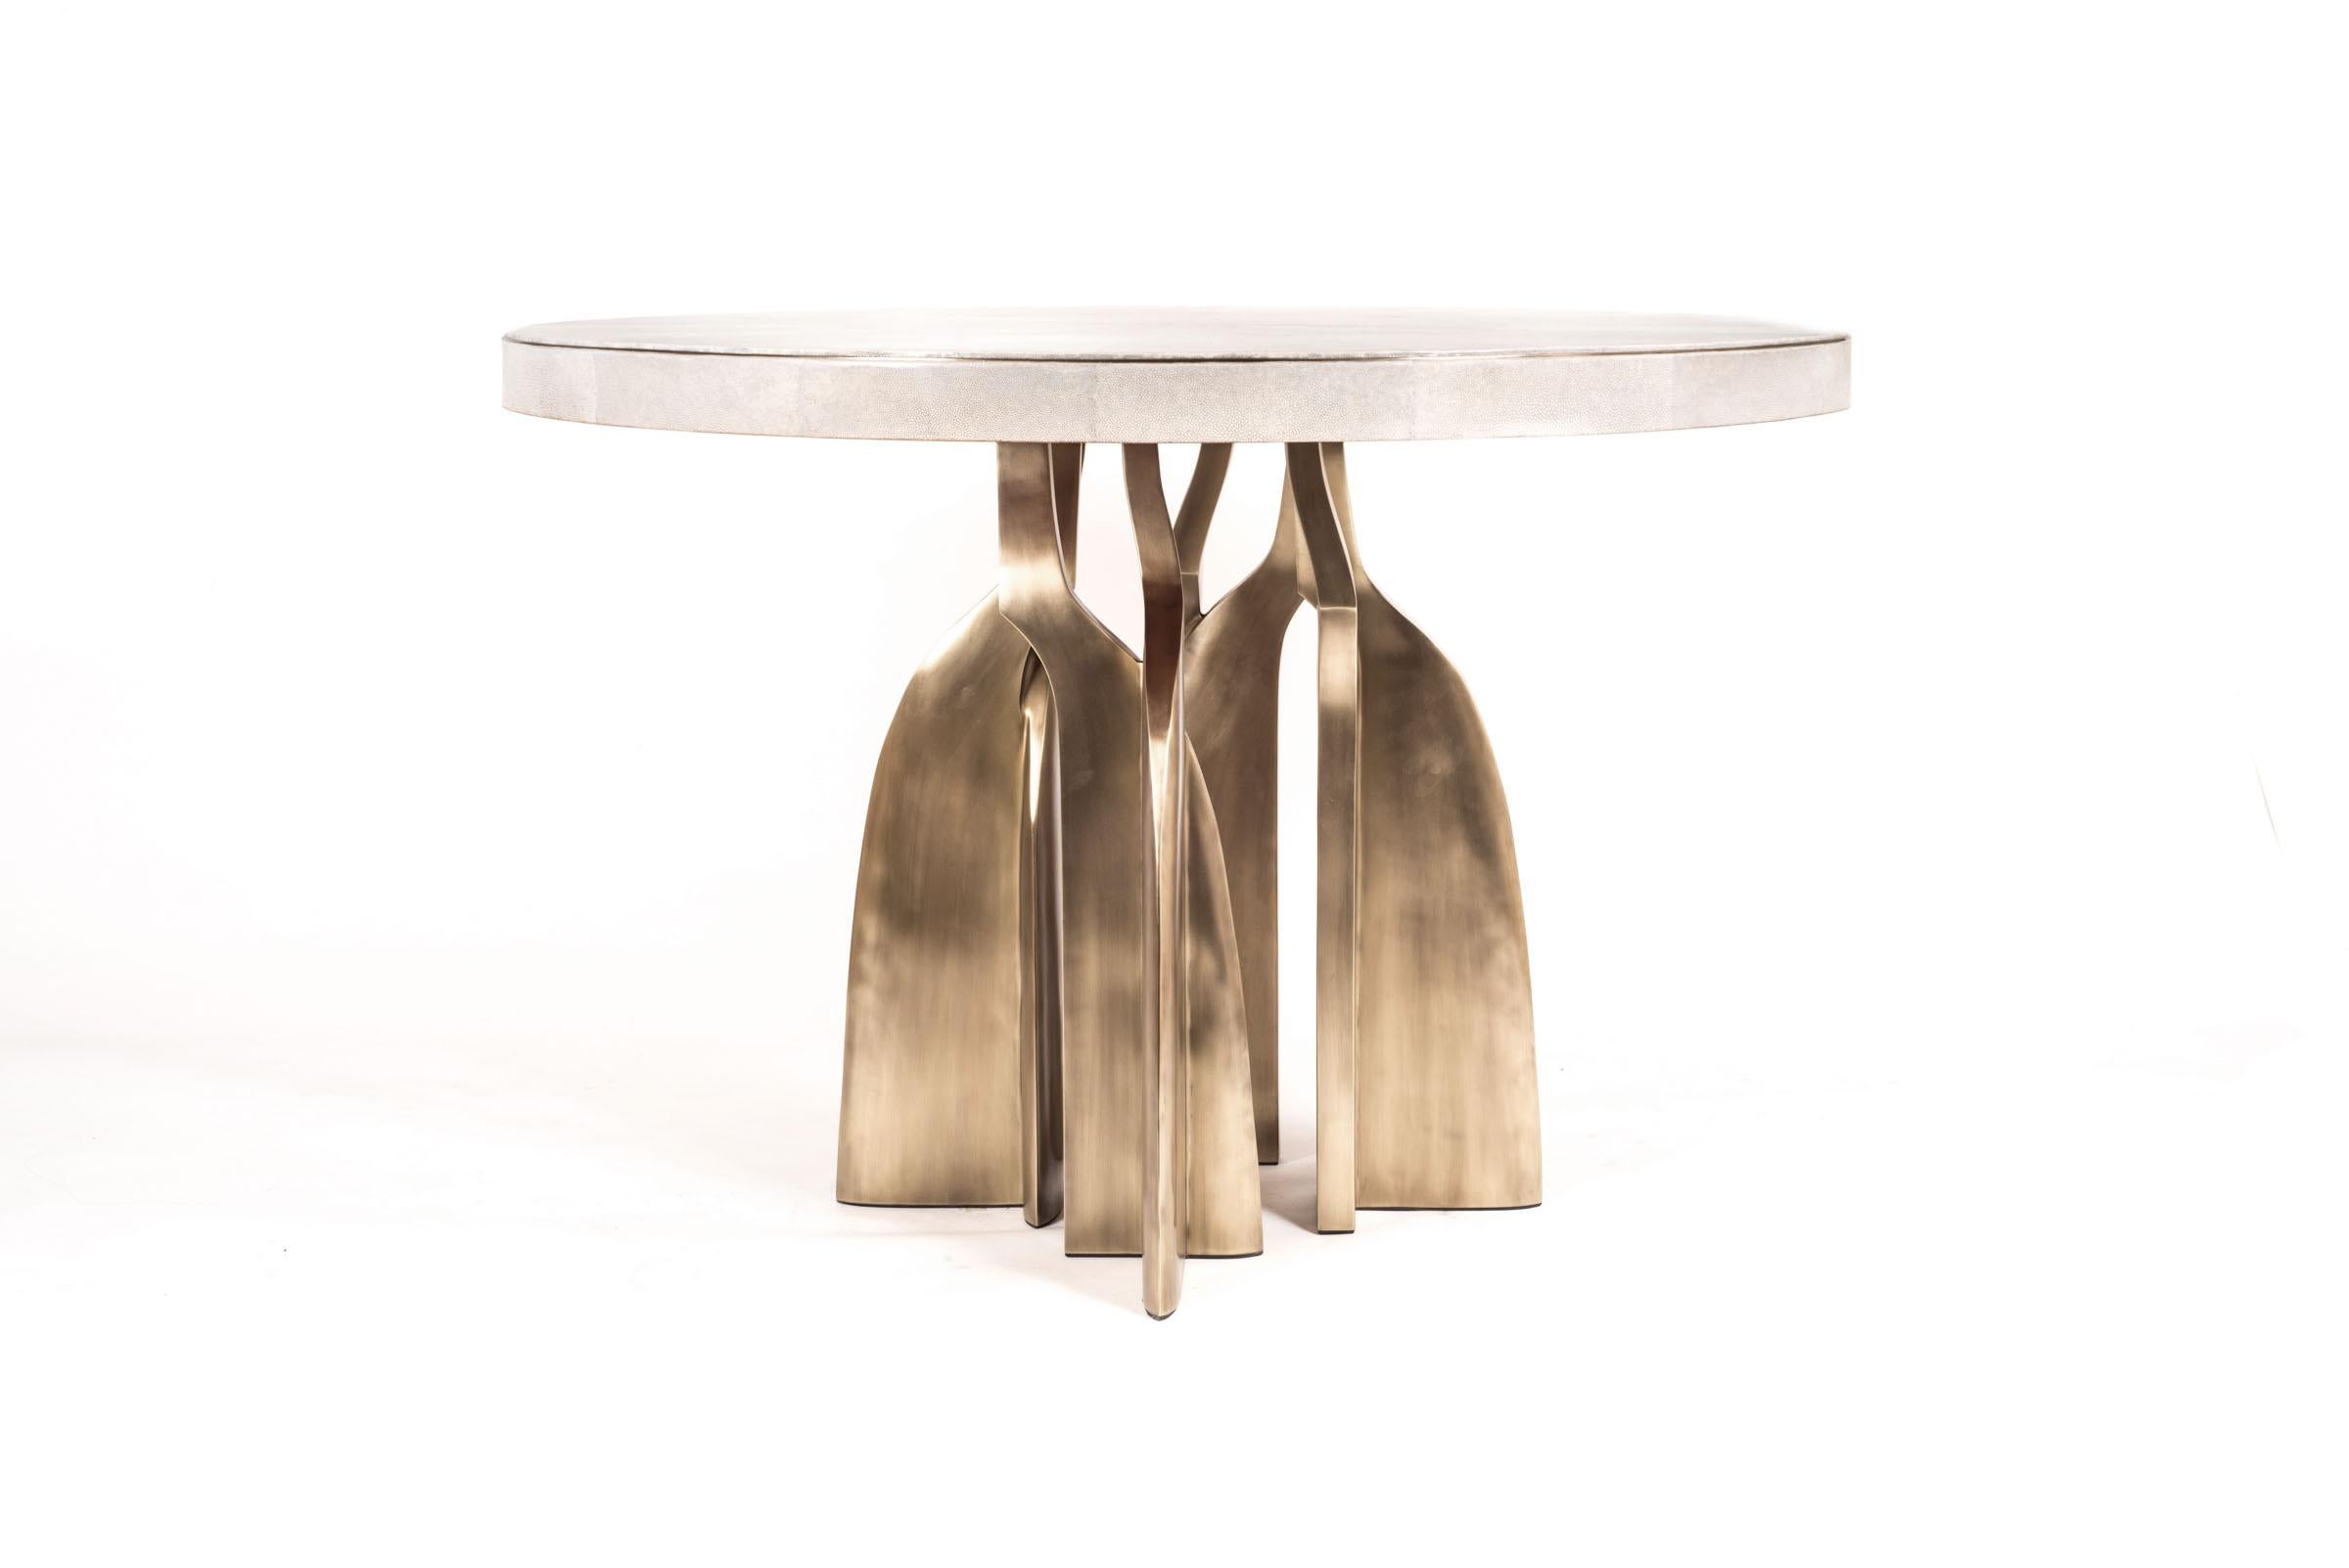 The Chital breakfast table is a stunning piece, a statement in any space. The cream shagreen inlaid top has a subtle metal inset around the frame, followed by bronze-patina brass sculptural legs clustered together as the base. This piece is designed